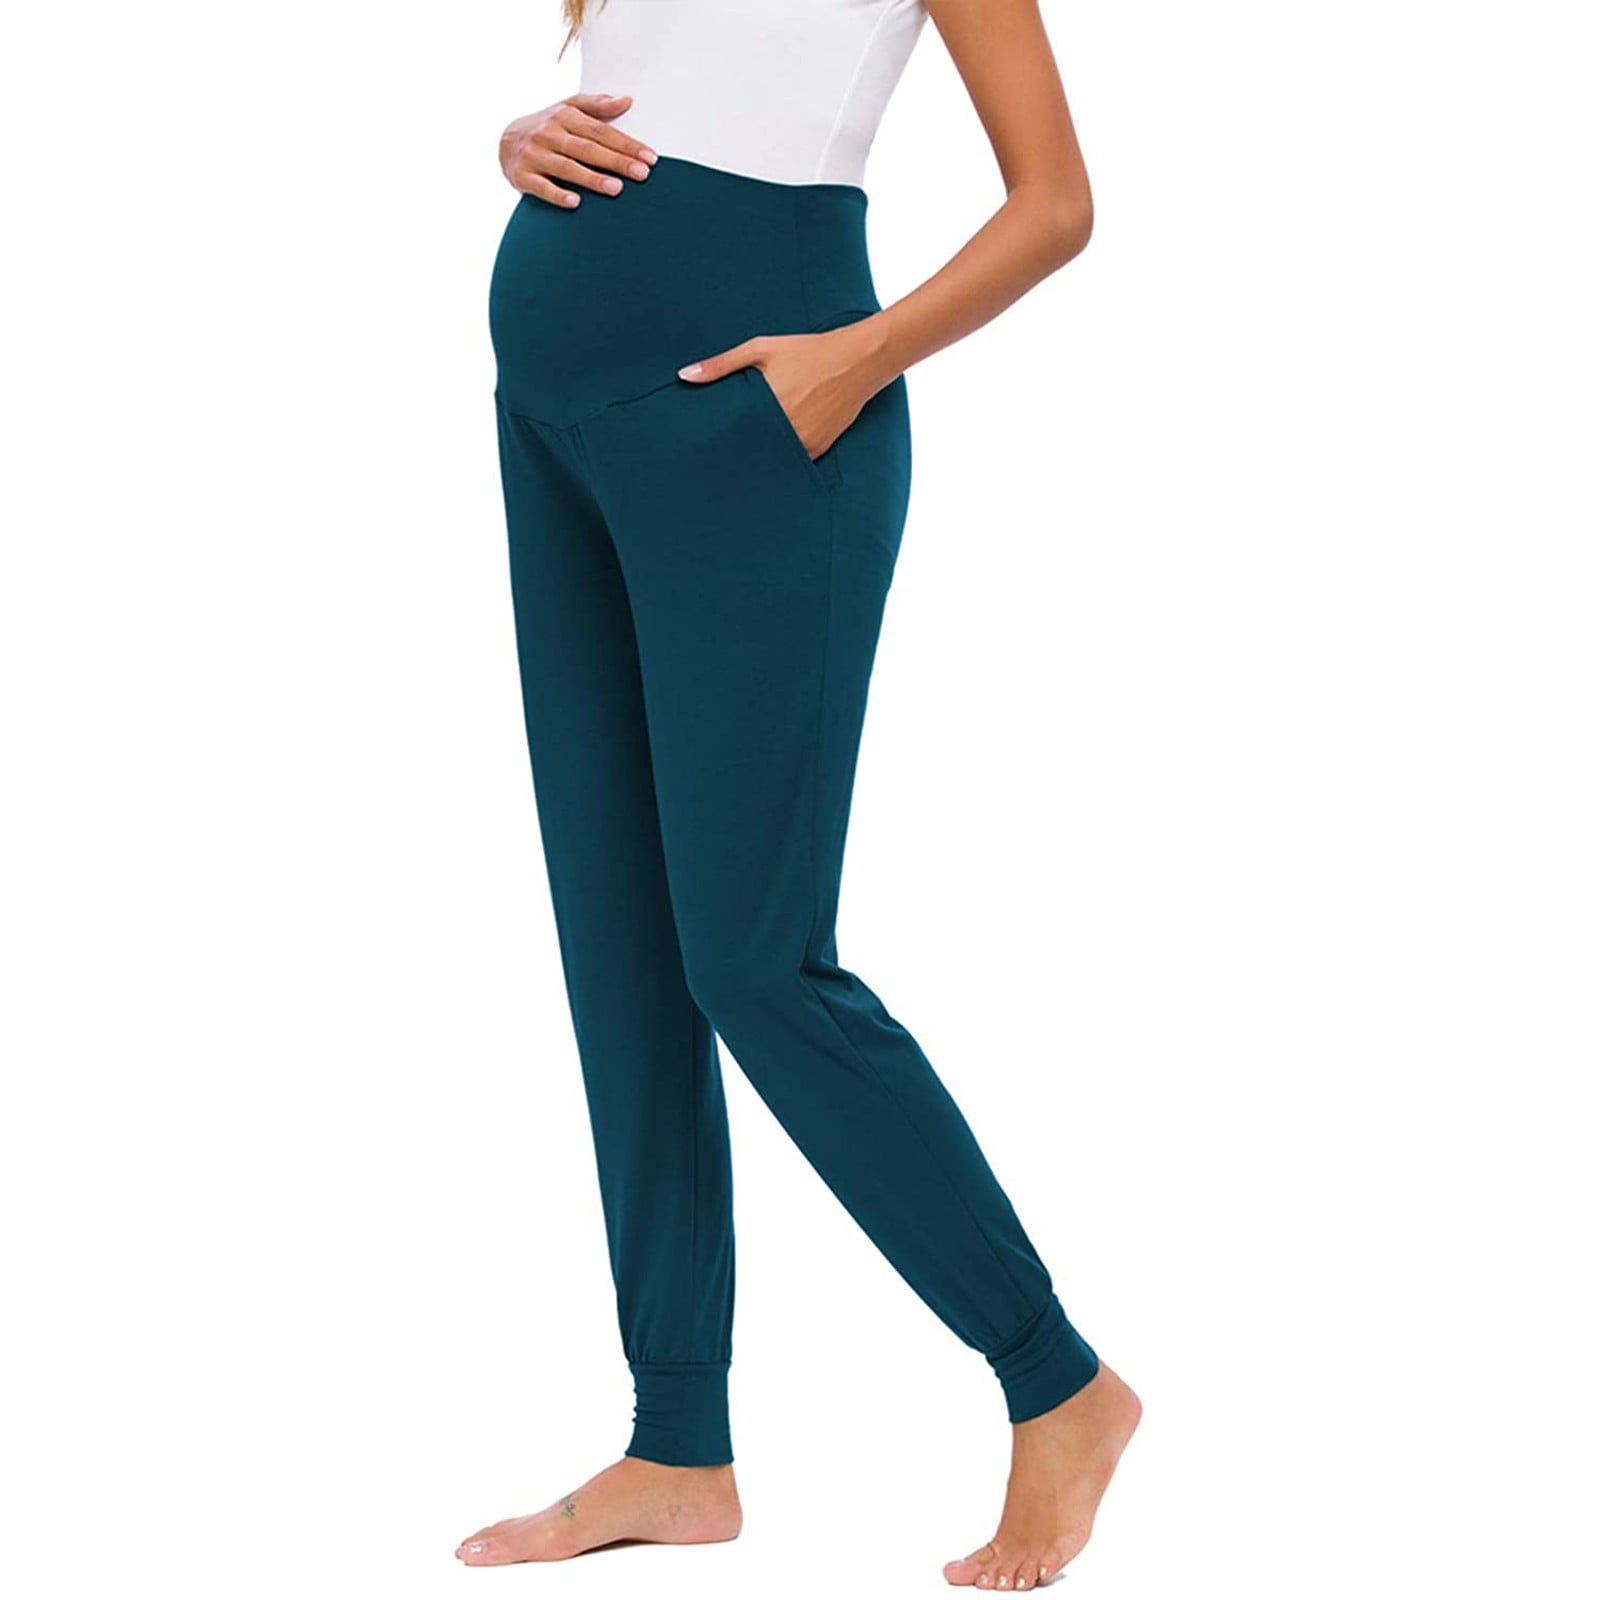 Taqqpue Women's Maternity Leggings Over the Belly Pregnancy Casual Comfy  Stretchy High Waist Pregnancy Yoga Pants Active Pregnancy Joggers Wear  Workout Leggings with Pockets 